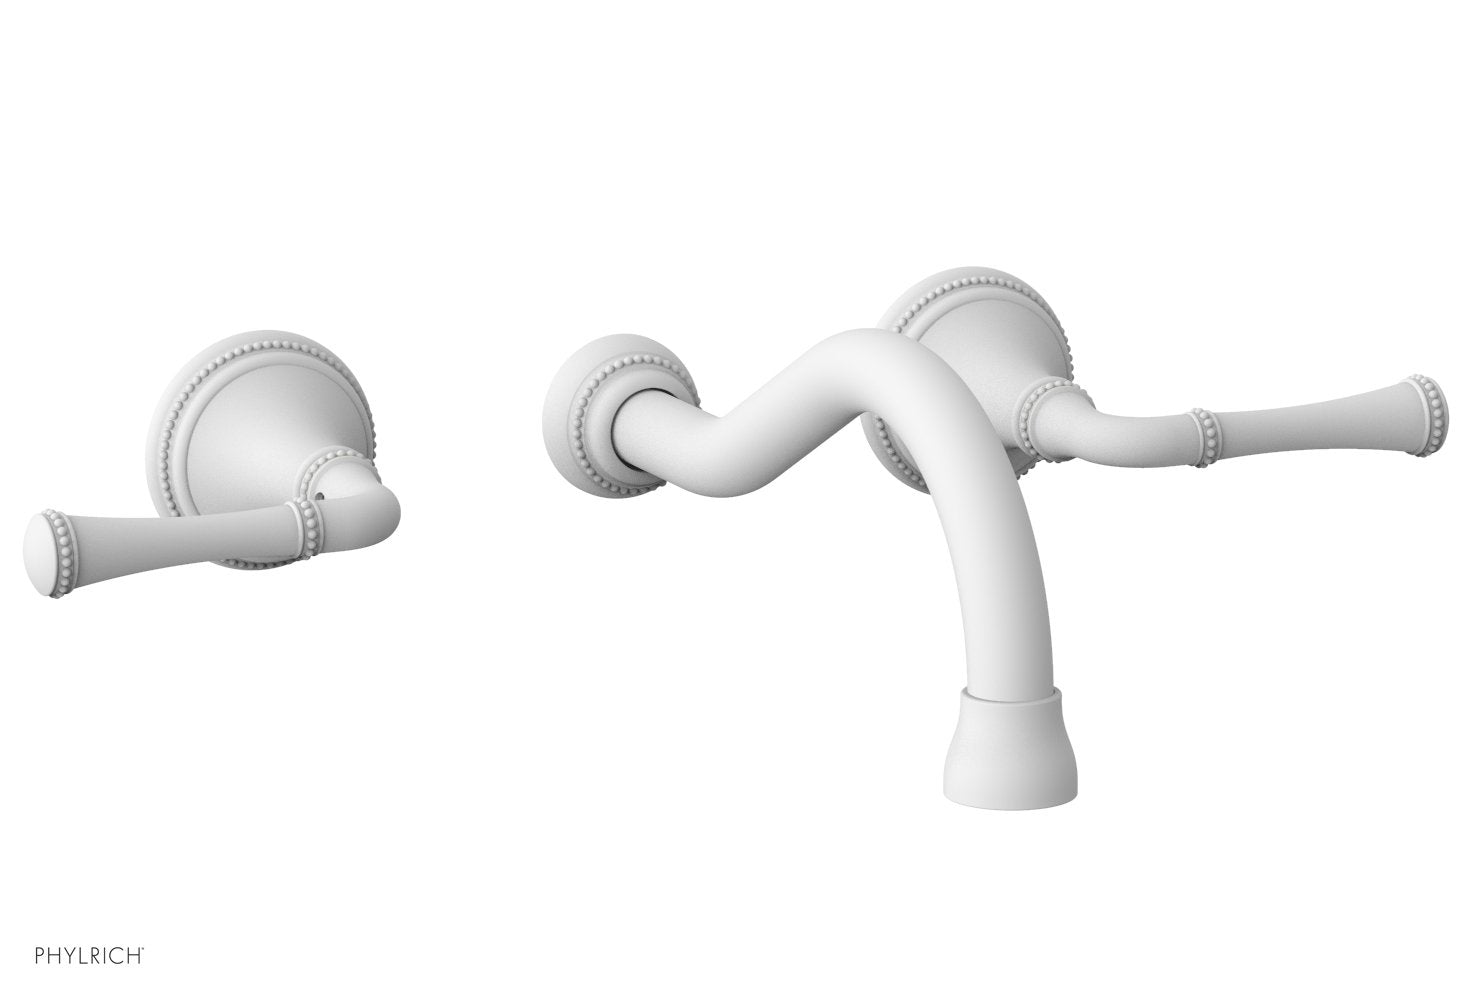 Phylrich BEADED Widespread Faucet